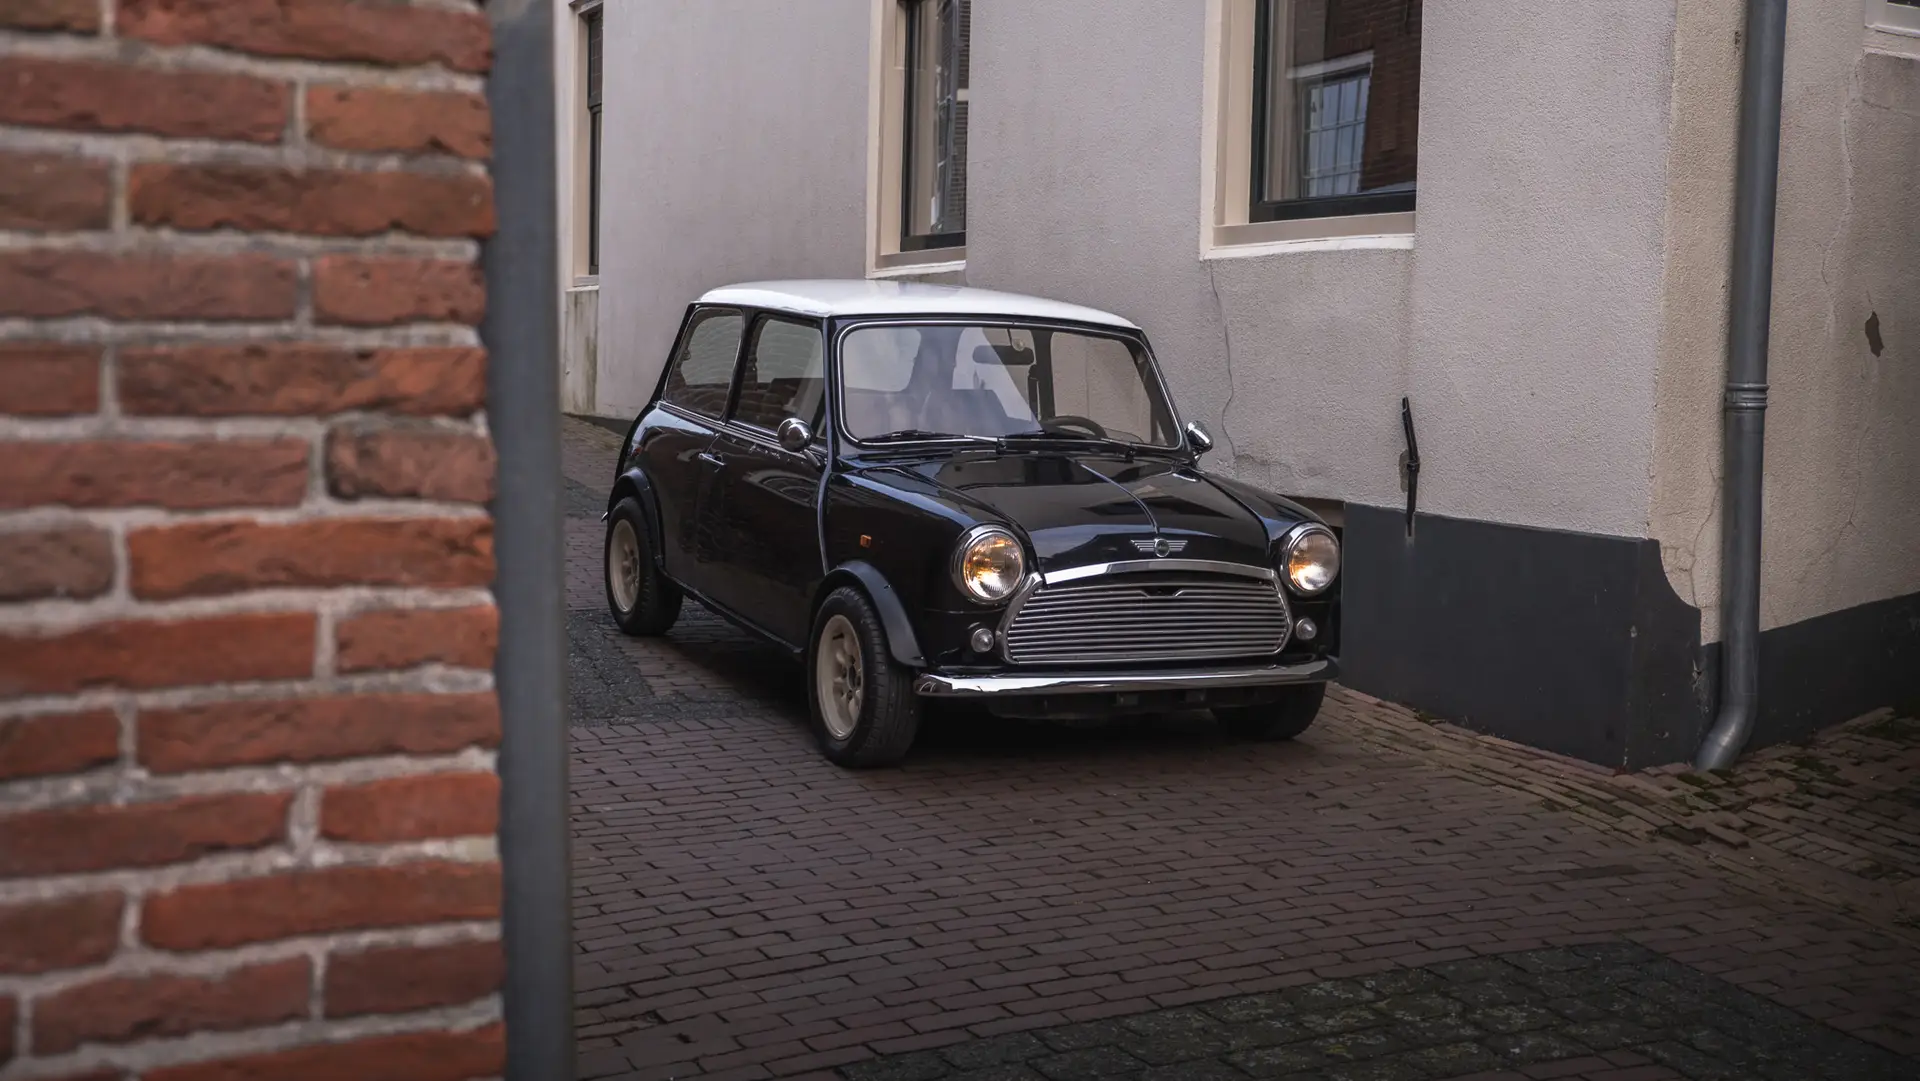 A black Mini City driving out of the alley